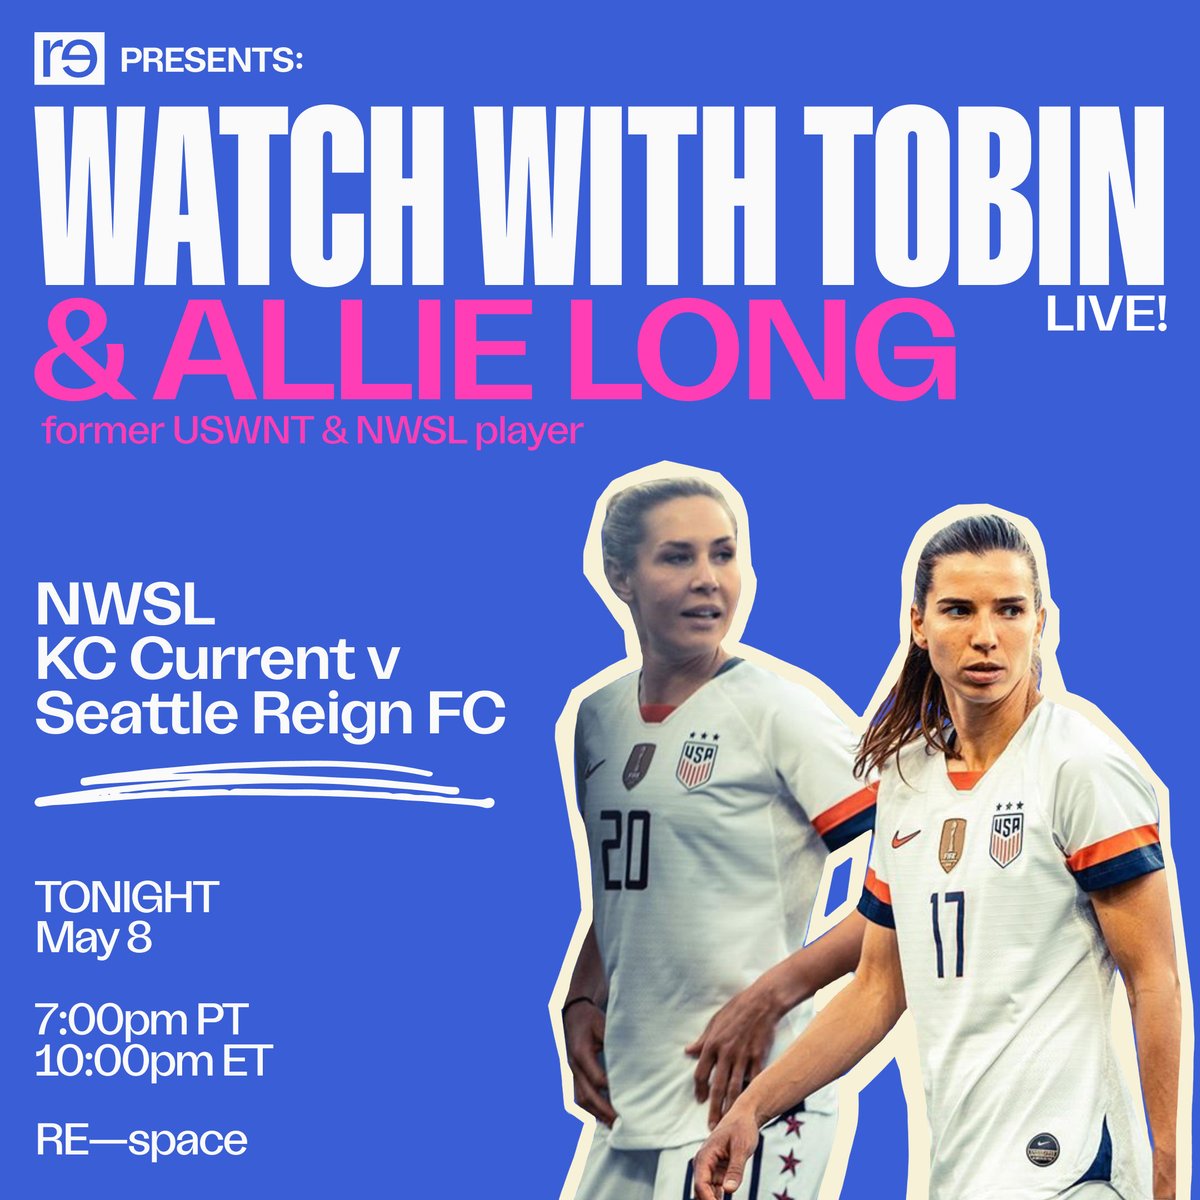 🚨TONIGHT🚨 we’re not just watching with @TobinHeath, we’re watching with @ALLIE_LONG too! 👏 you won’t want to miss out on watching with two pros⚽ Join us over in Membership: re-imagine.visitlink.me/b-rWAn